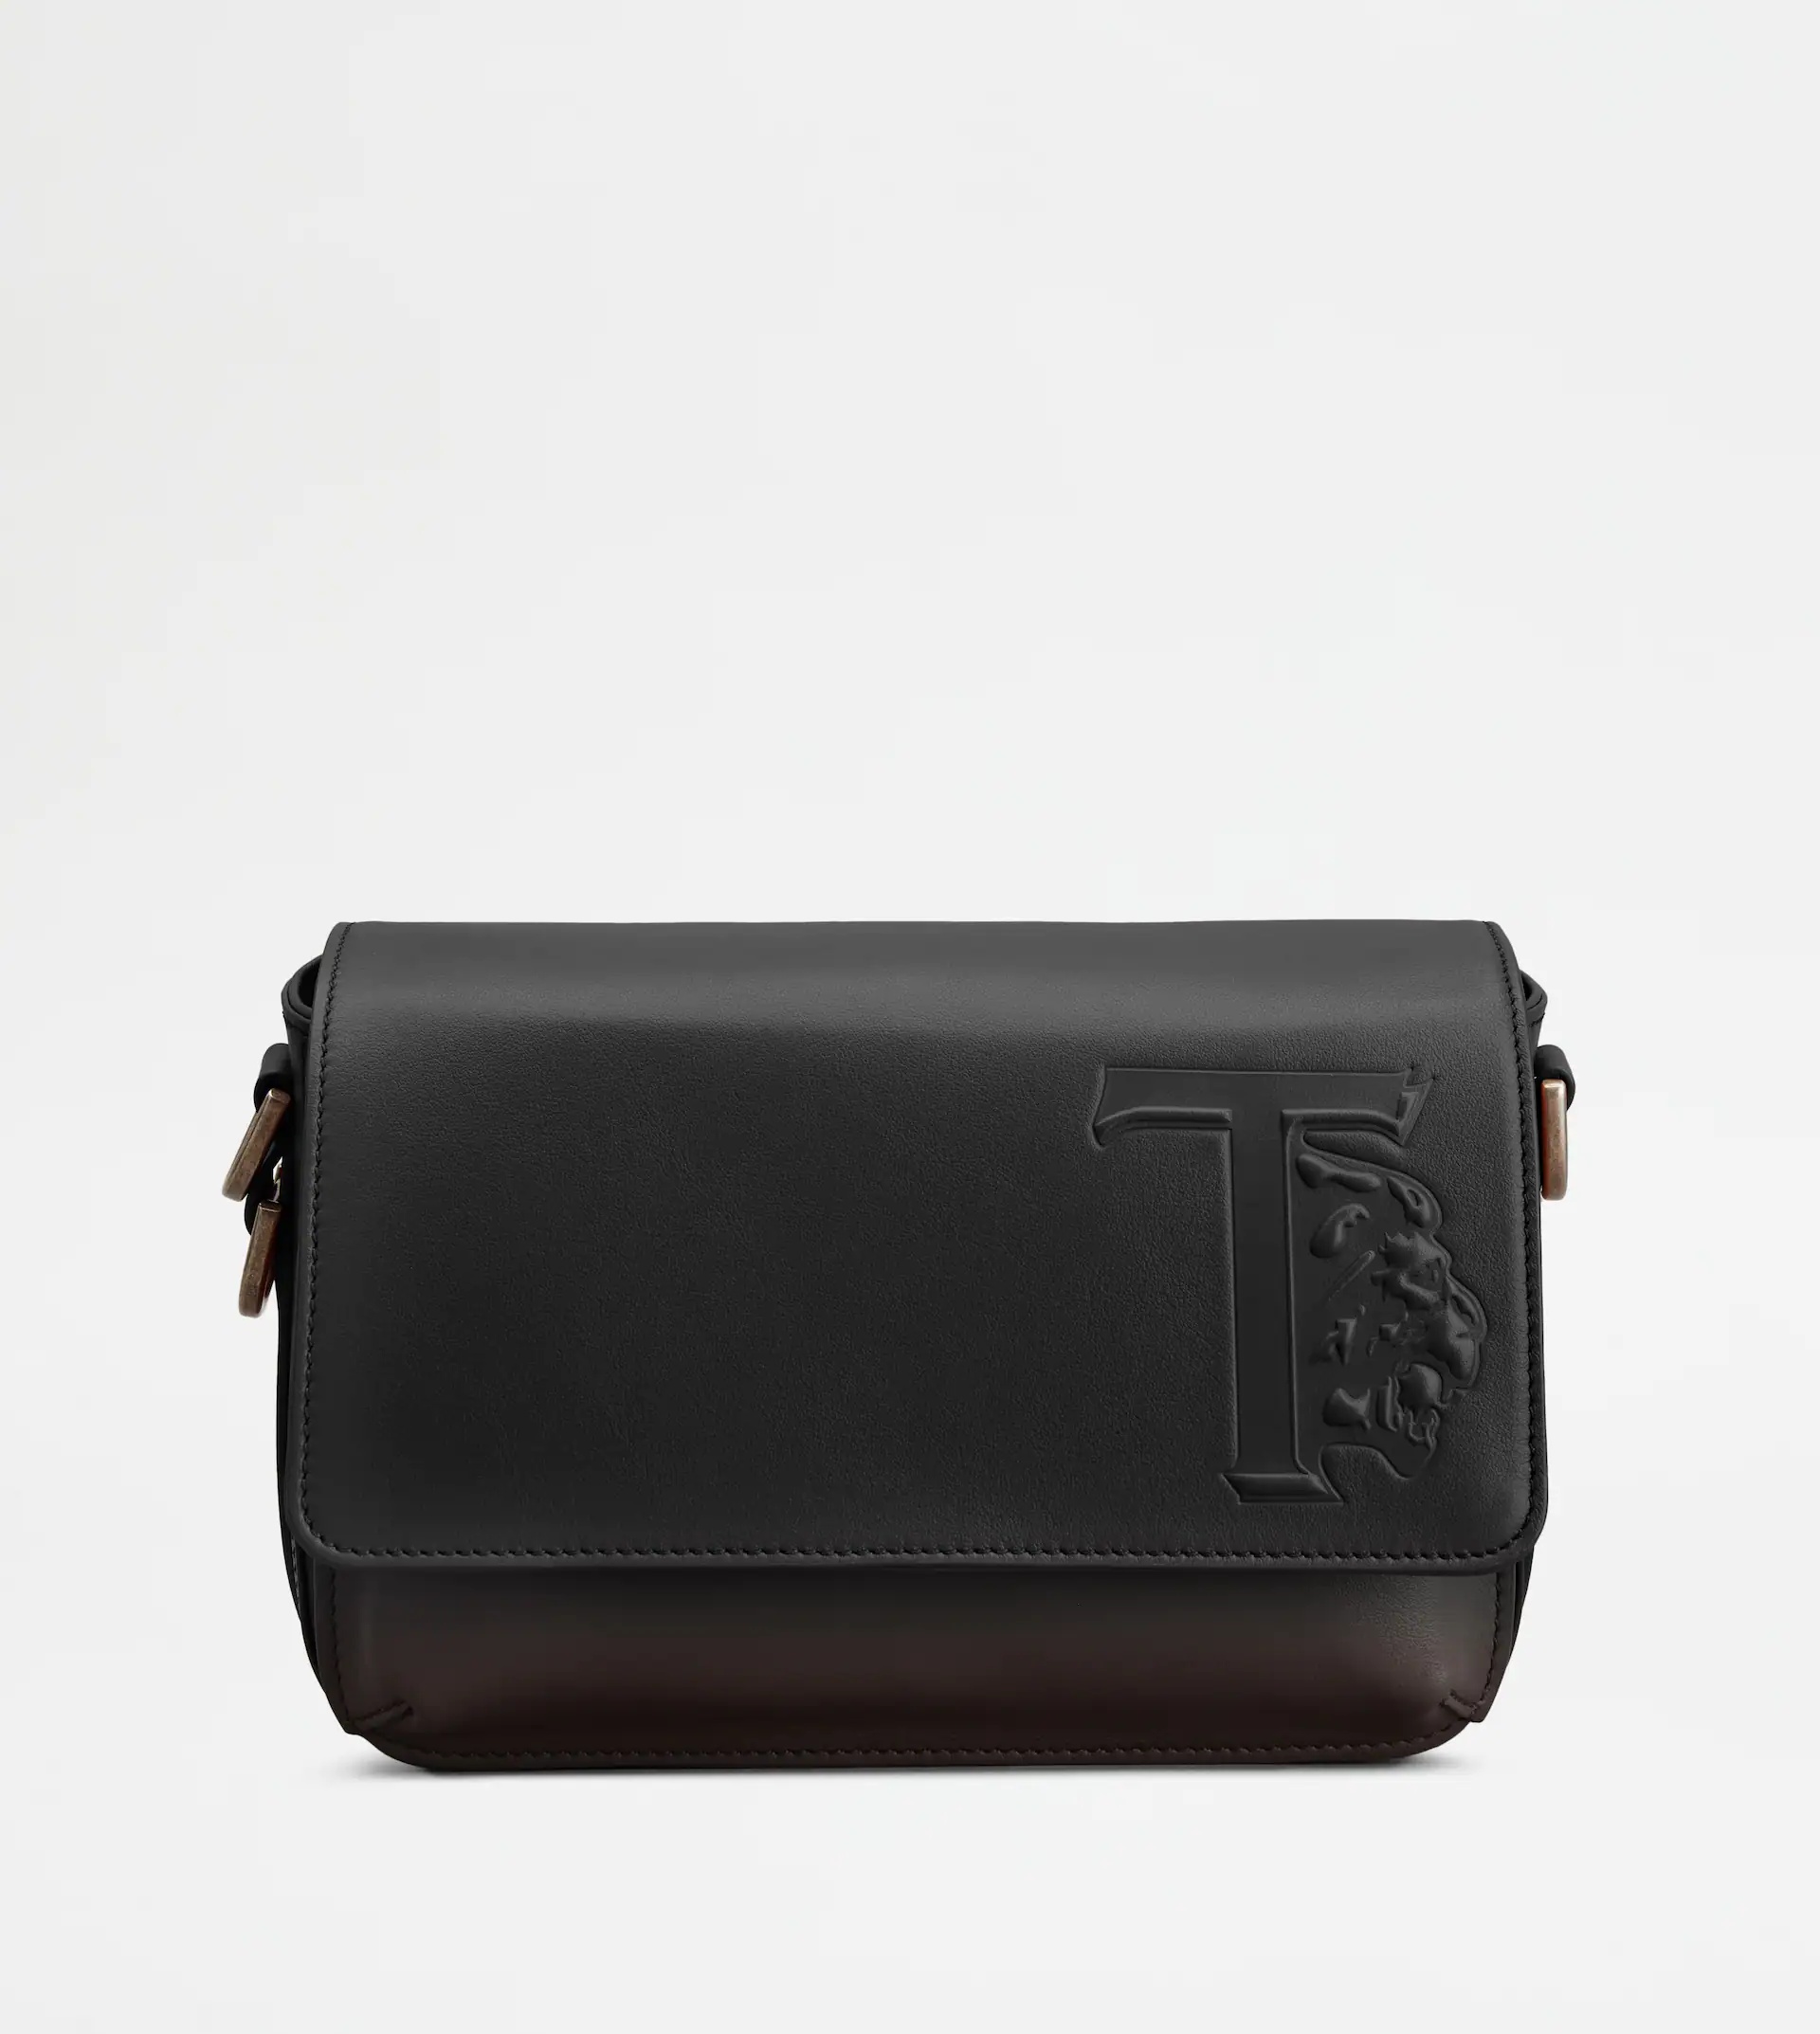 TOD'S CROSSBODY BAG IN LEATHER SMALL - BLACK - 1